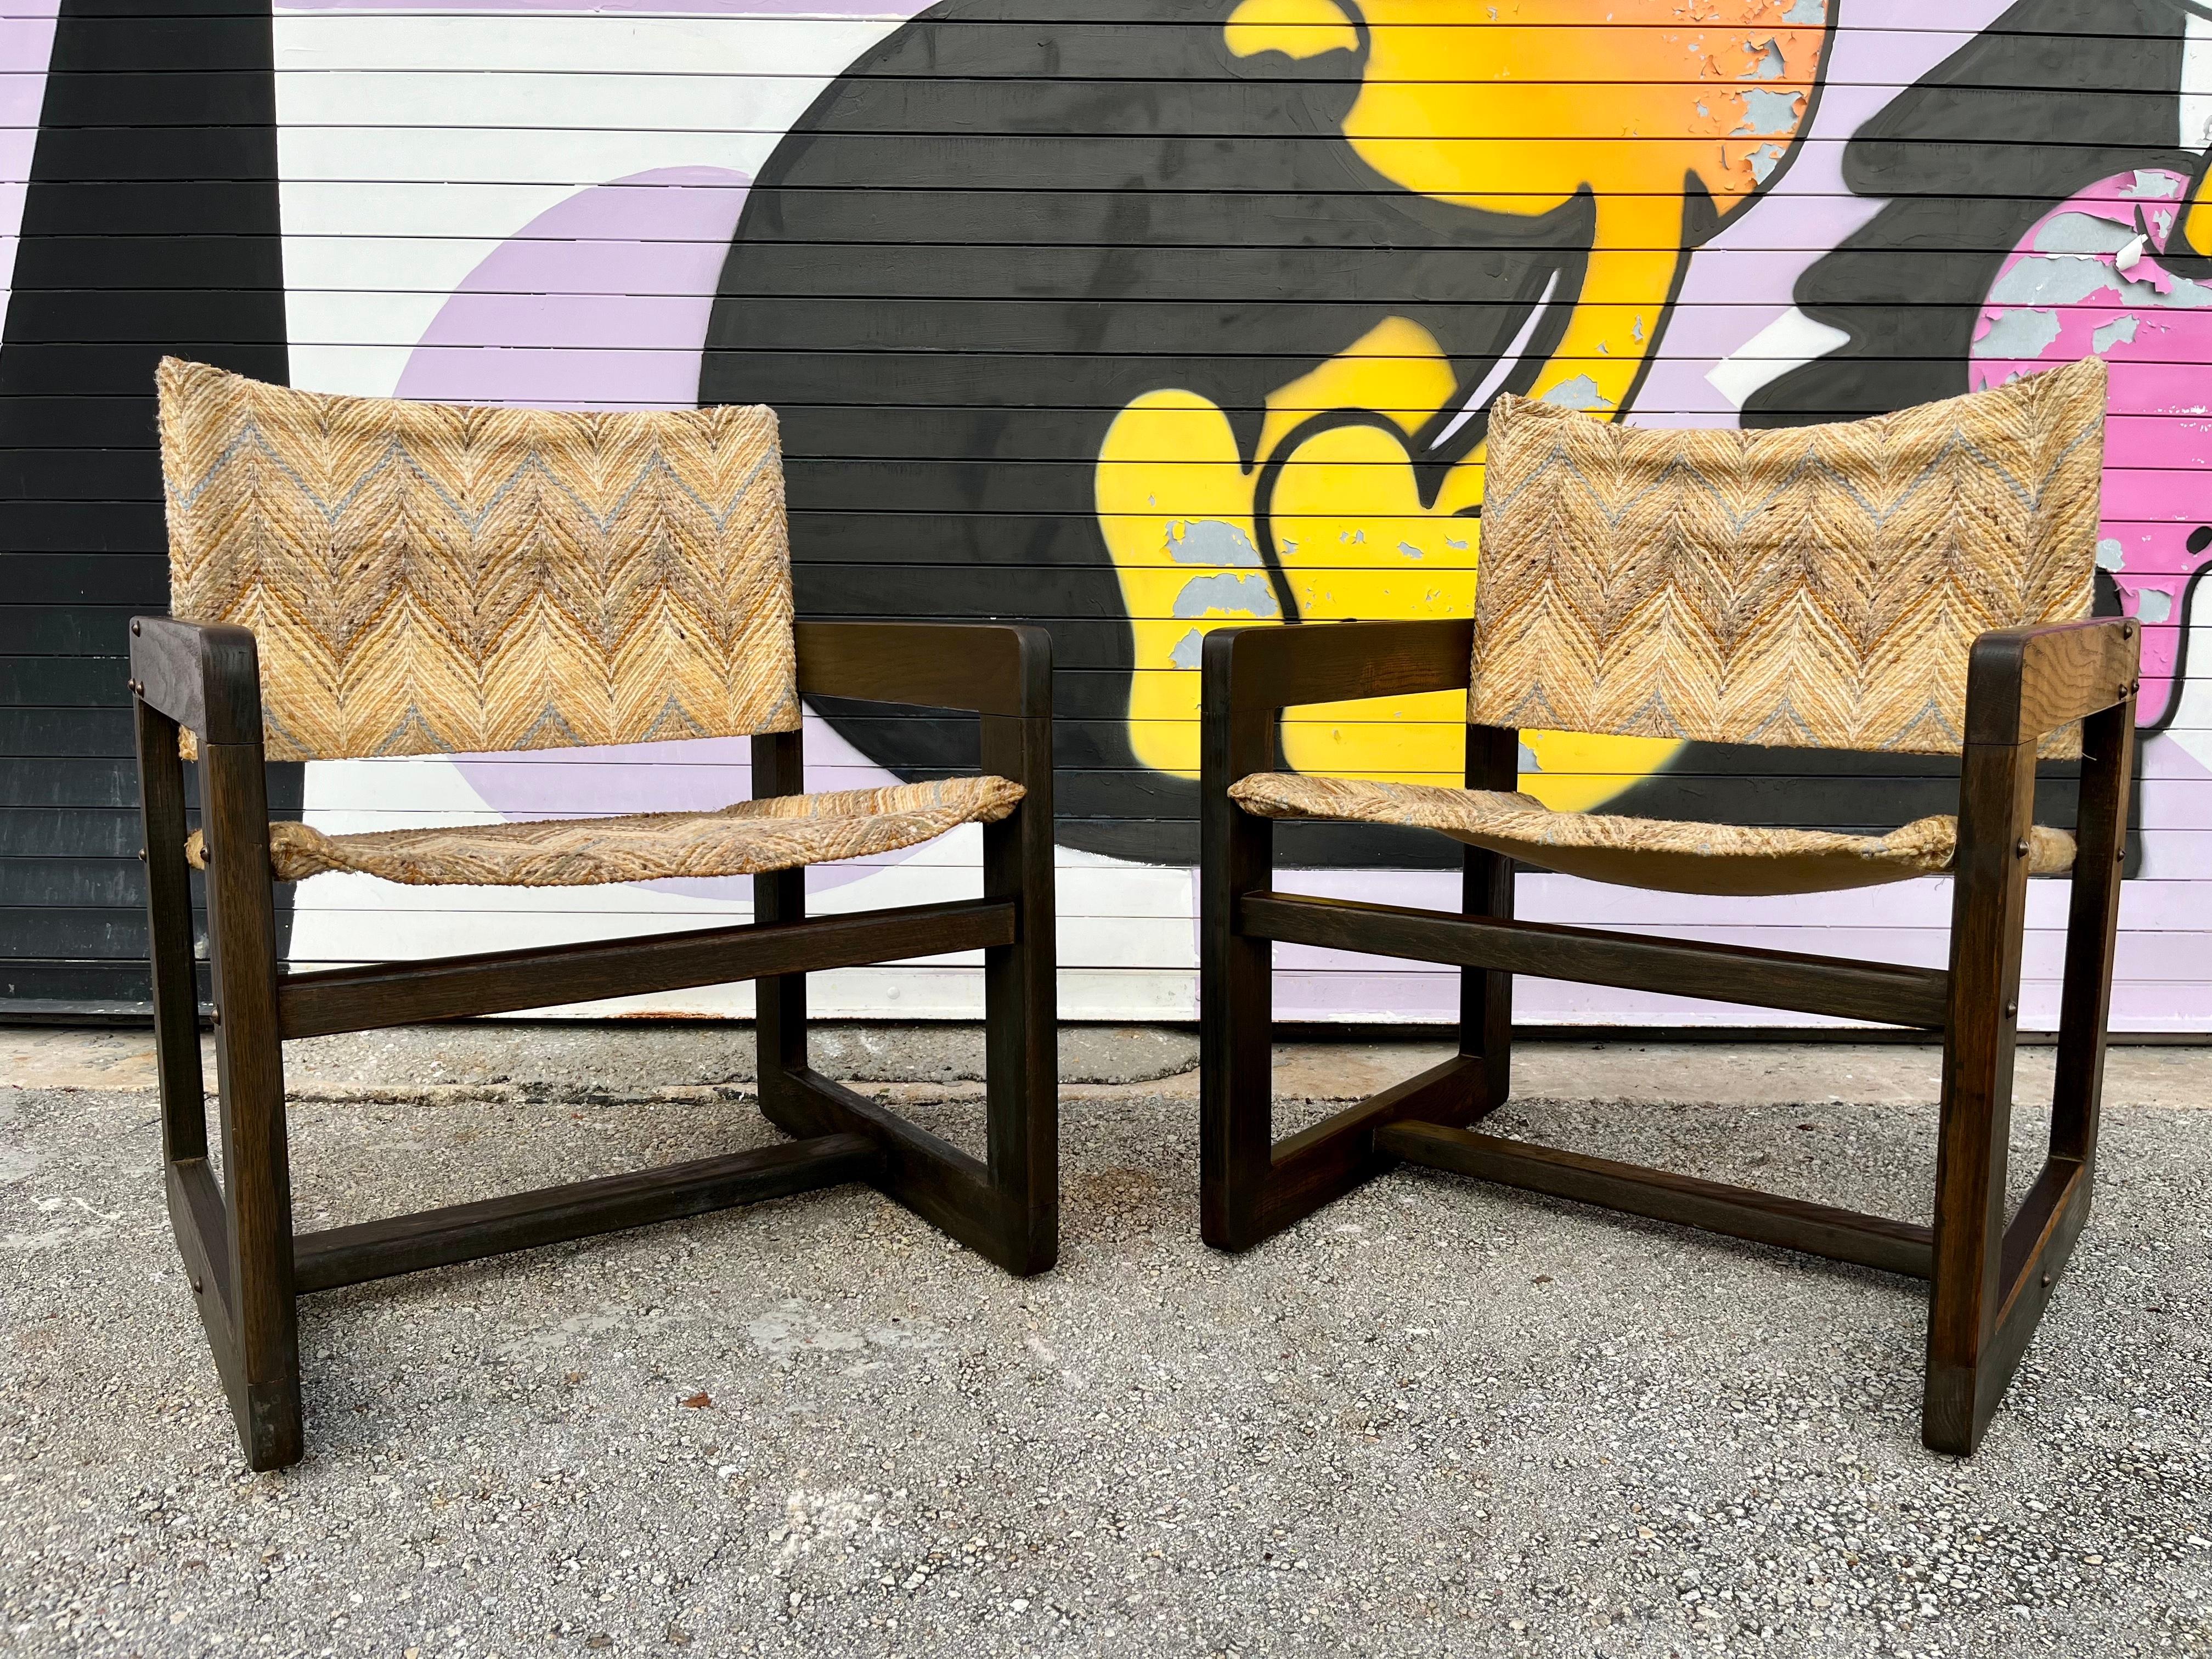 A Pair of Vintage Mid Century Modern Cube Lounge Chairs in the Karin Mobring Diana Armchairs Style. Circa 1970s
Feature a minimalist cubic design, a solid wood frame with a rich wood grain and the original Missoni Chevron Pattern Style Fabric. 
In